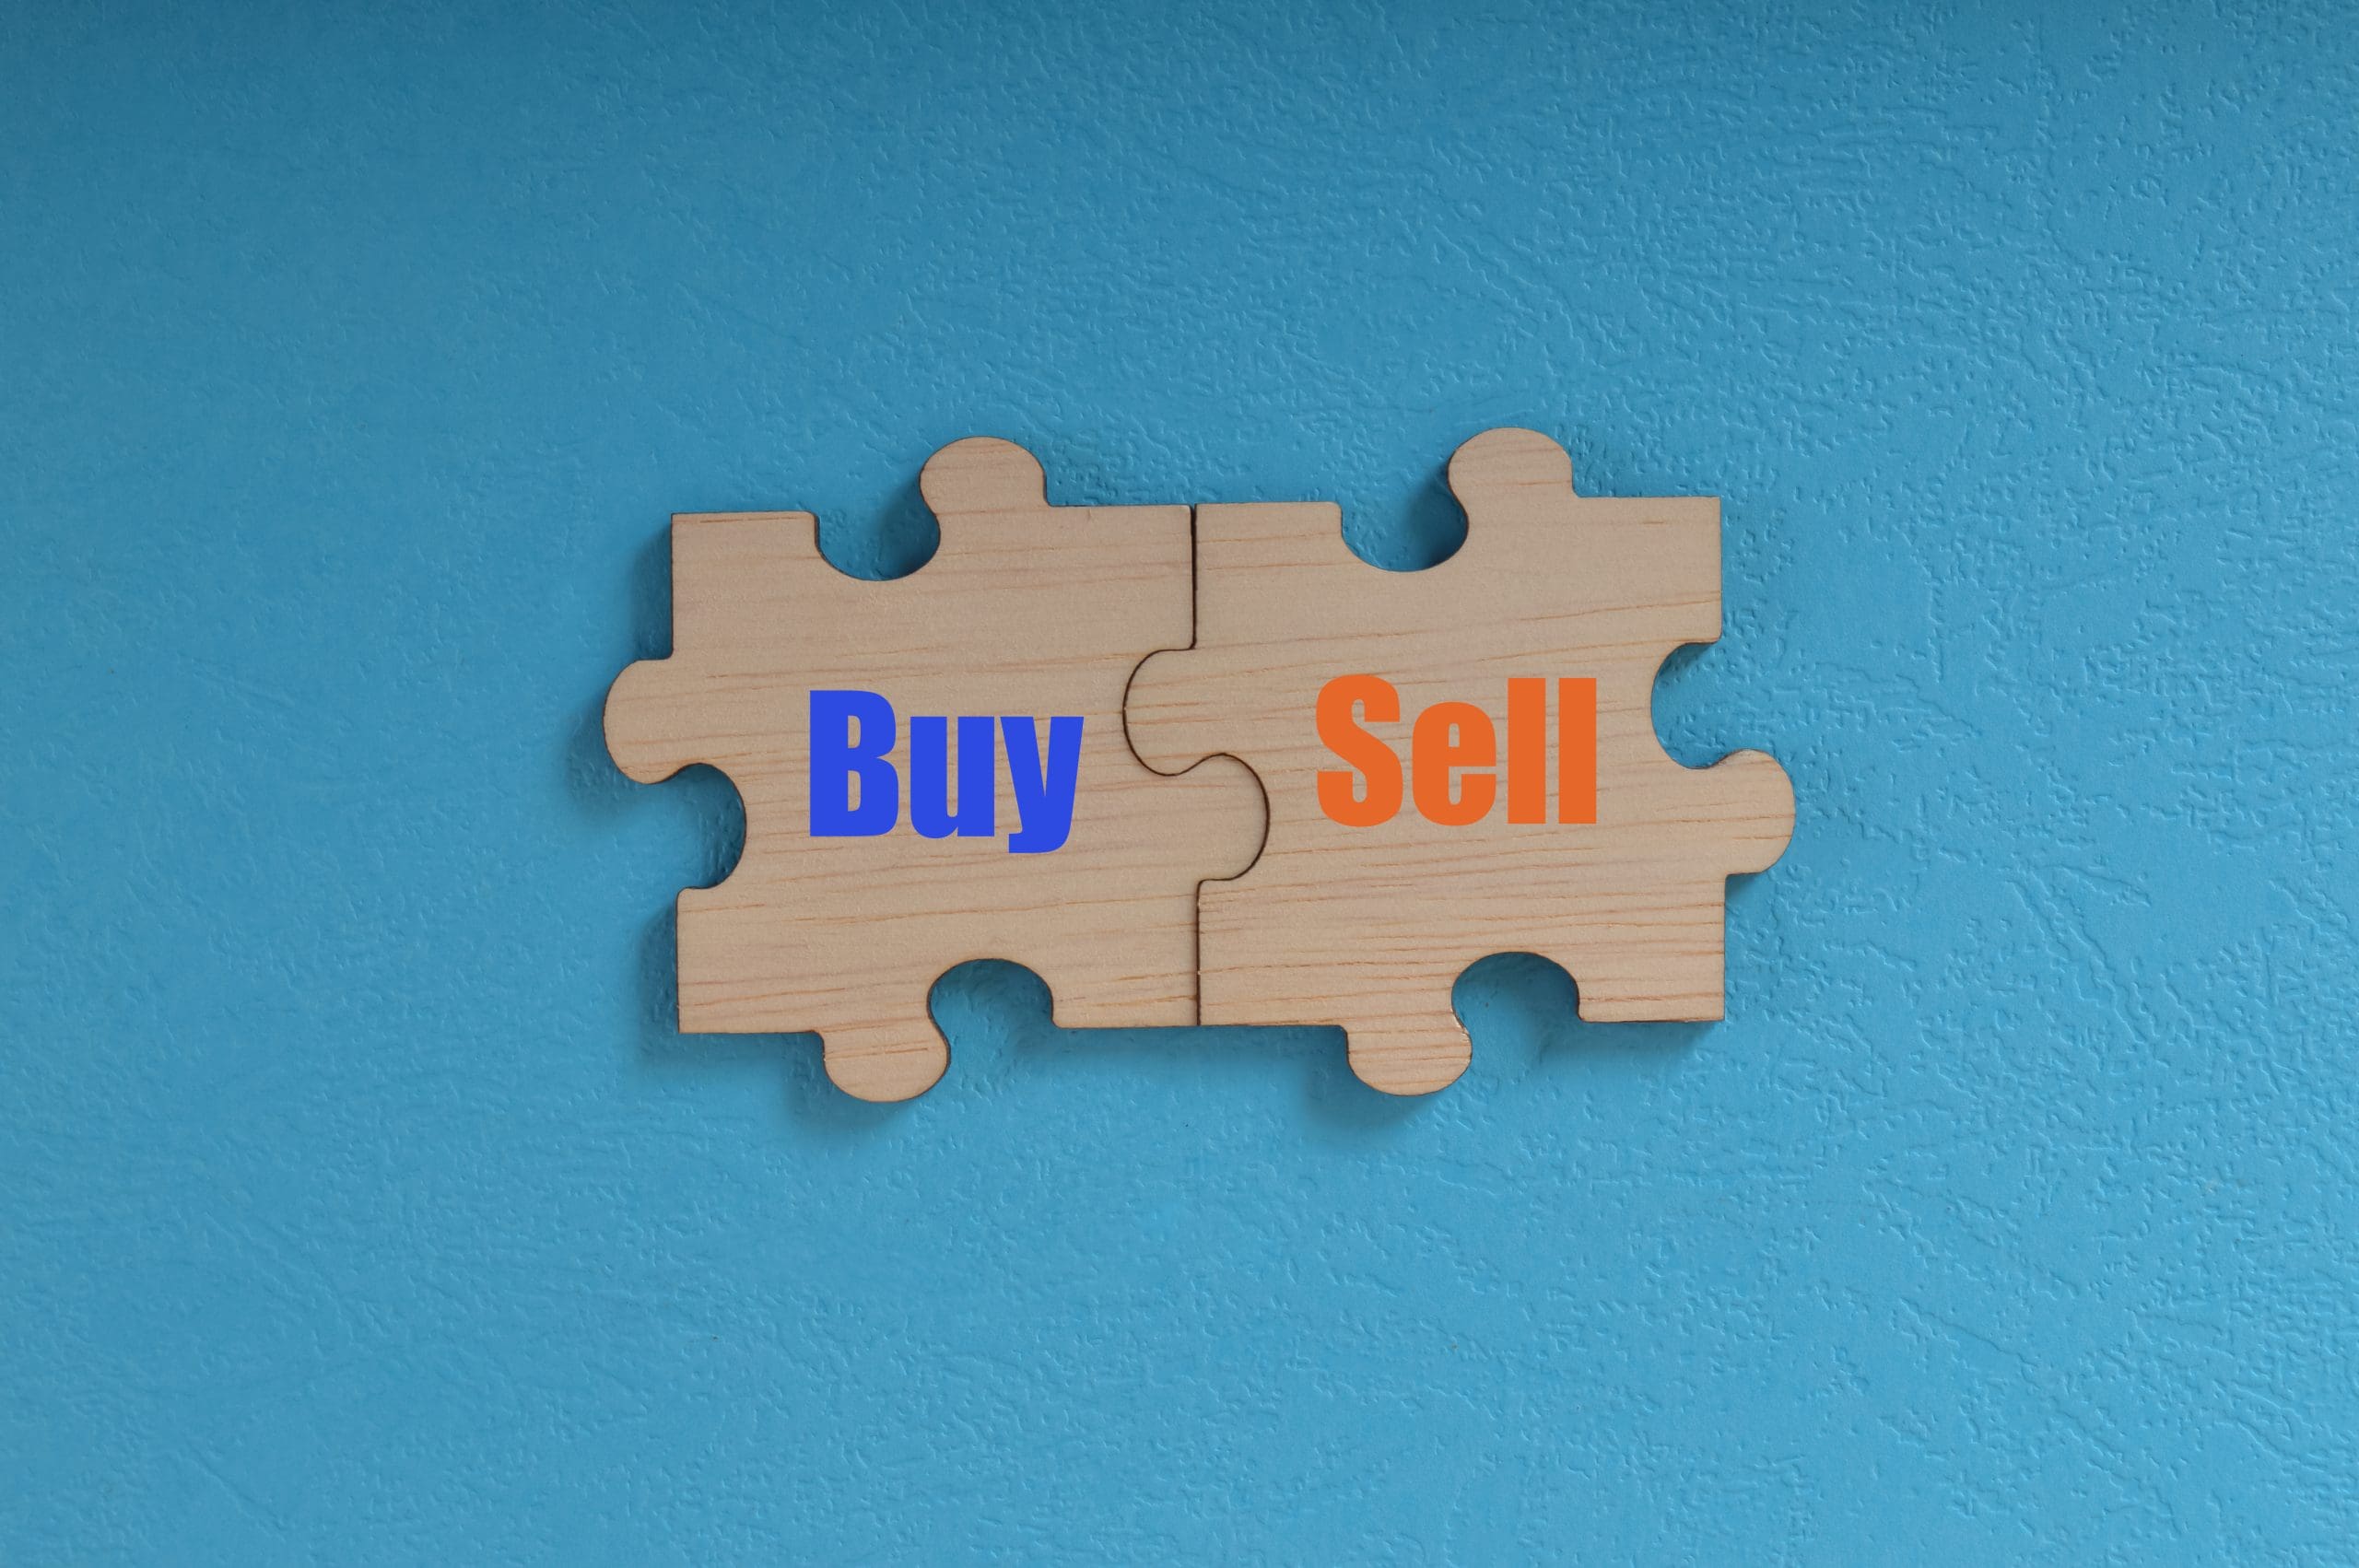 Selling and Buying Simultaneously: How to Coordinate Your Move